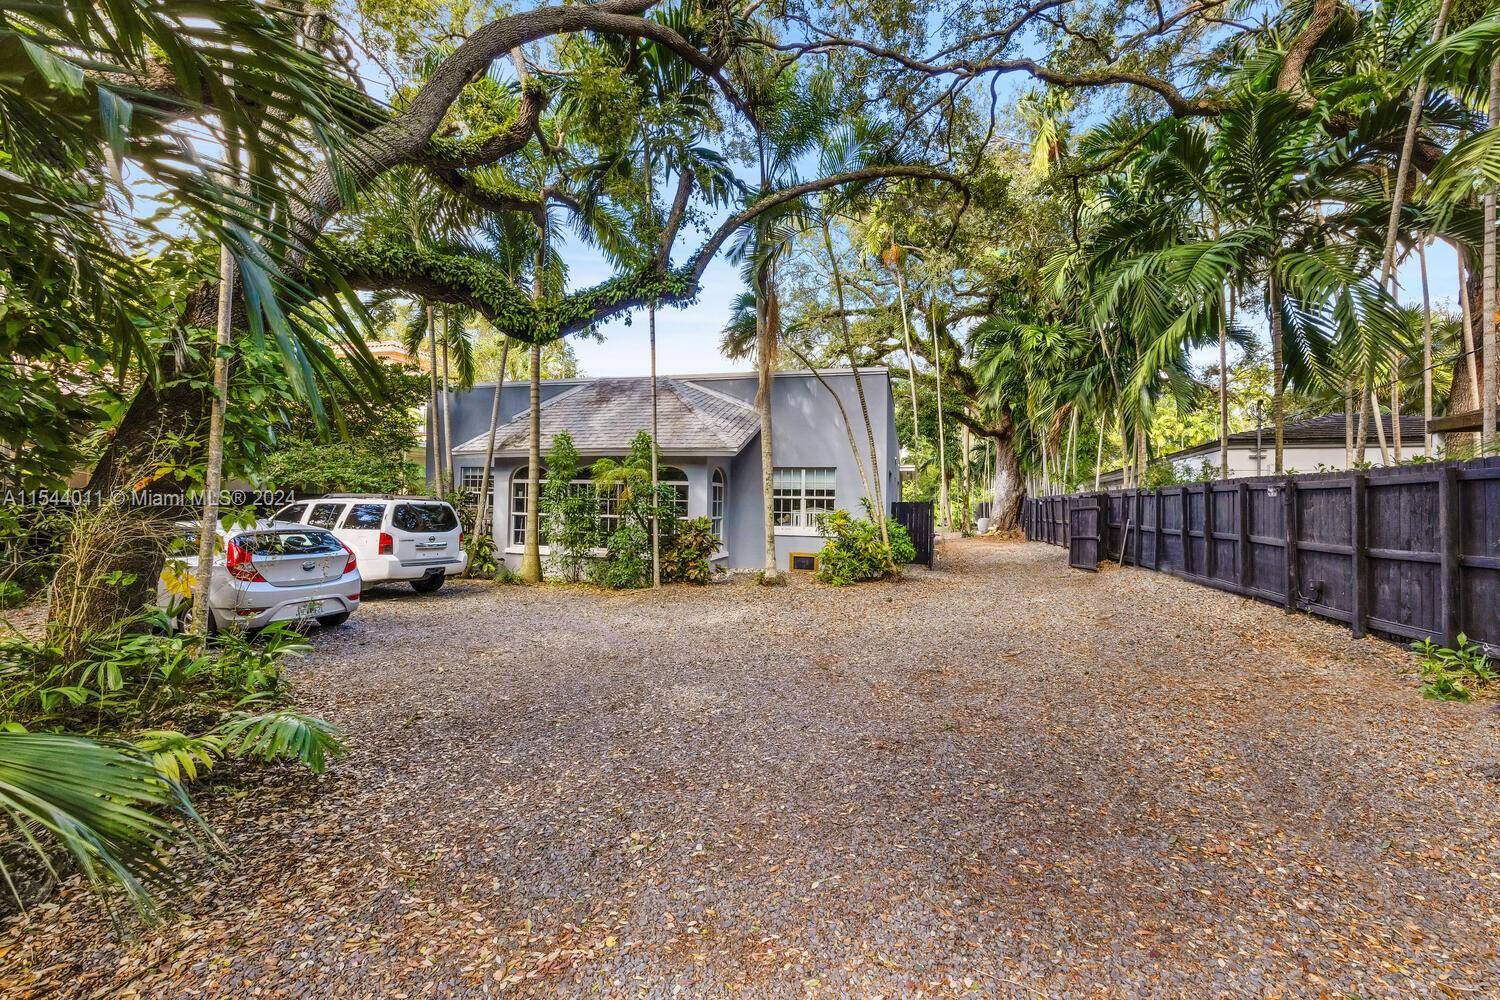 Live the Grove lifestyle on a captivating, tree canopied North Grove street just a short walk or bike ride to bayfront parks marinas.